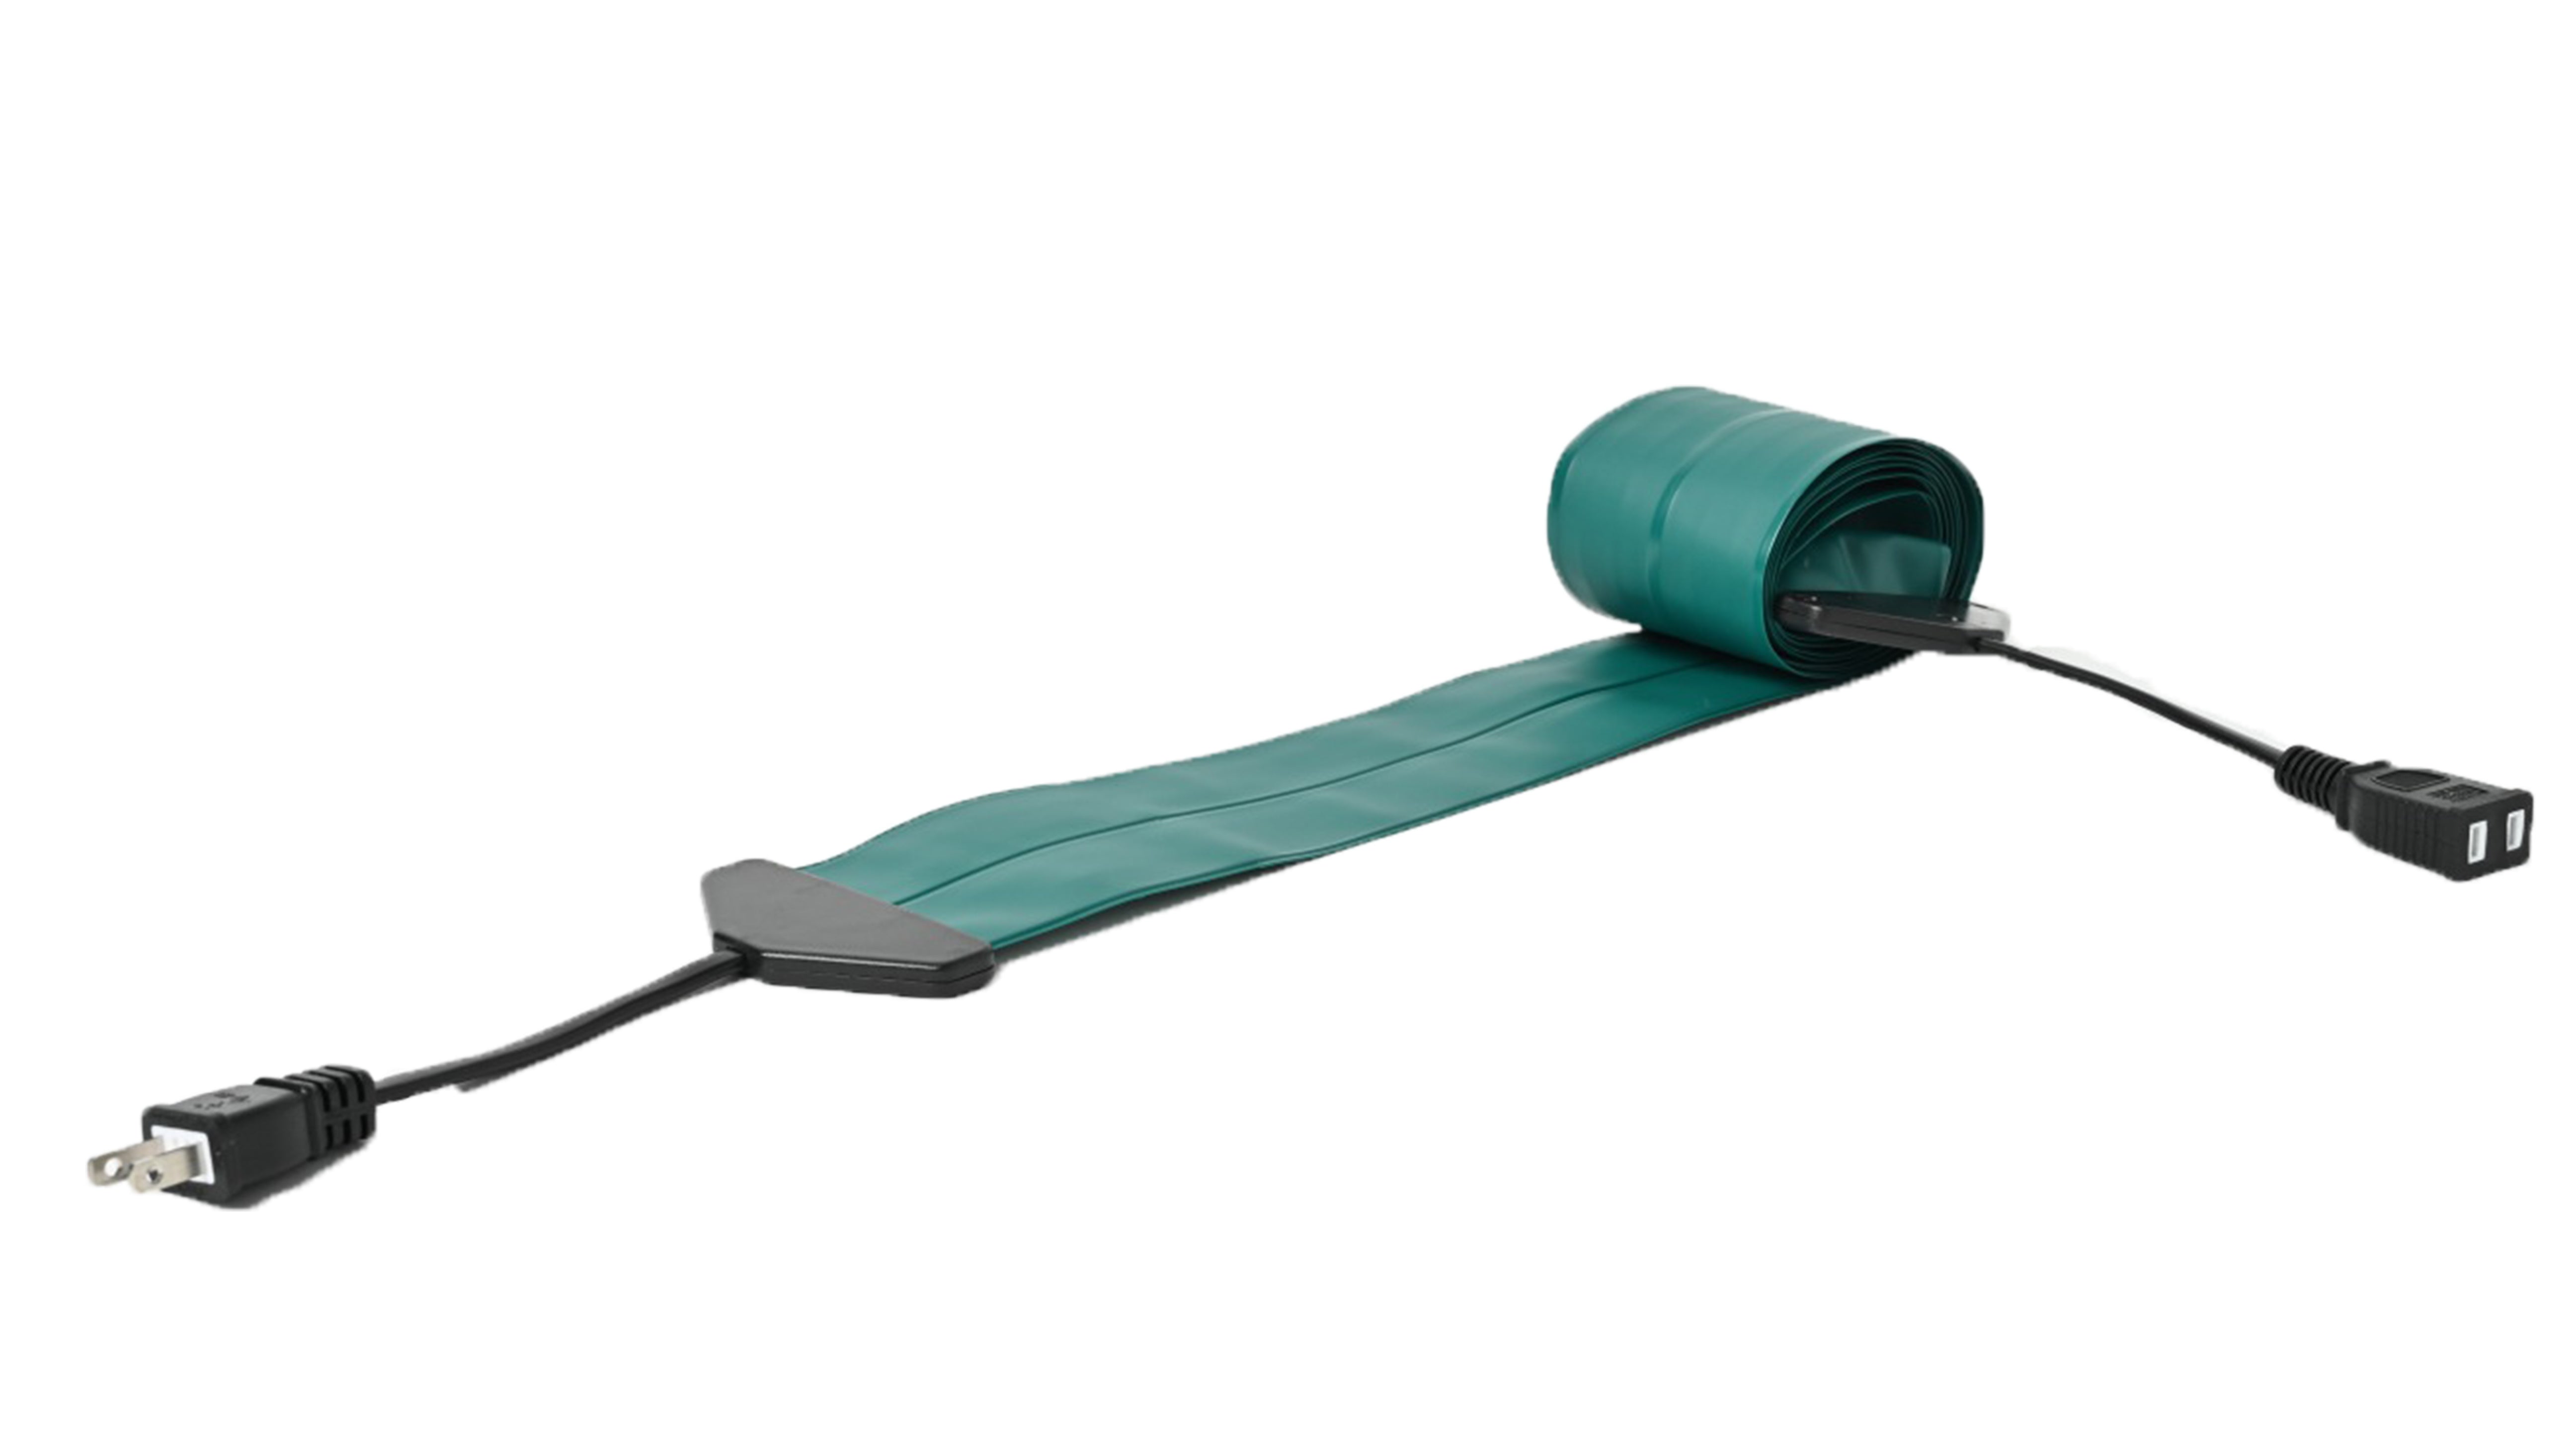 Koumeican the thinnest extension power cord in the world【Alpine Green】